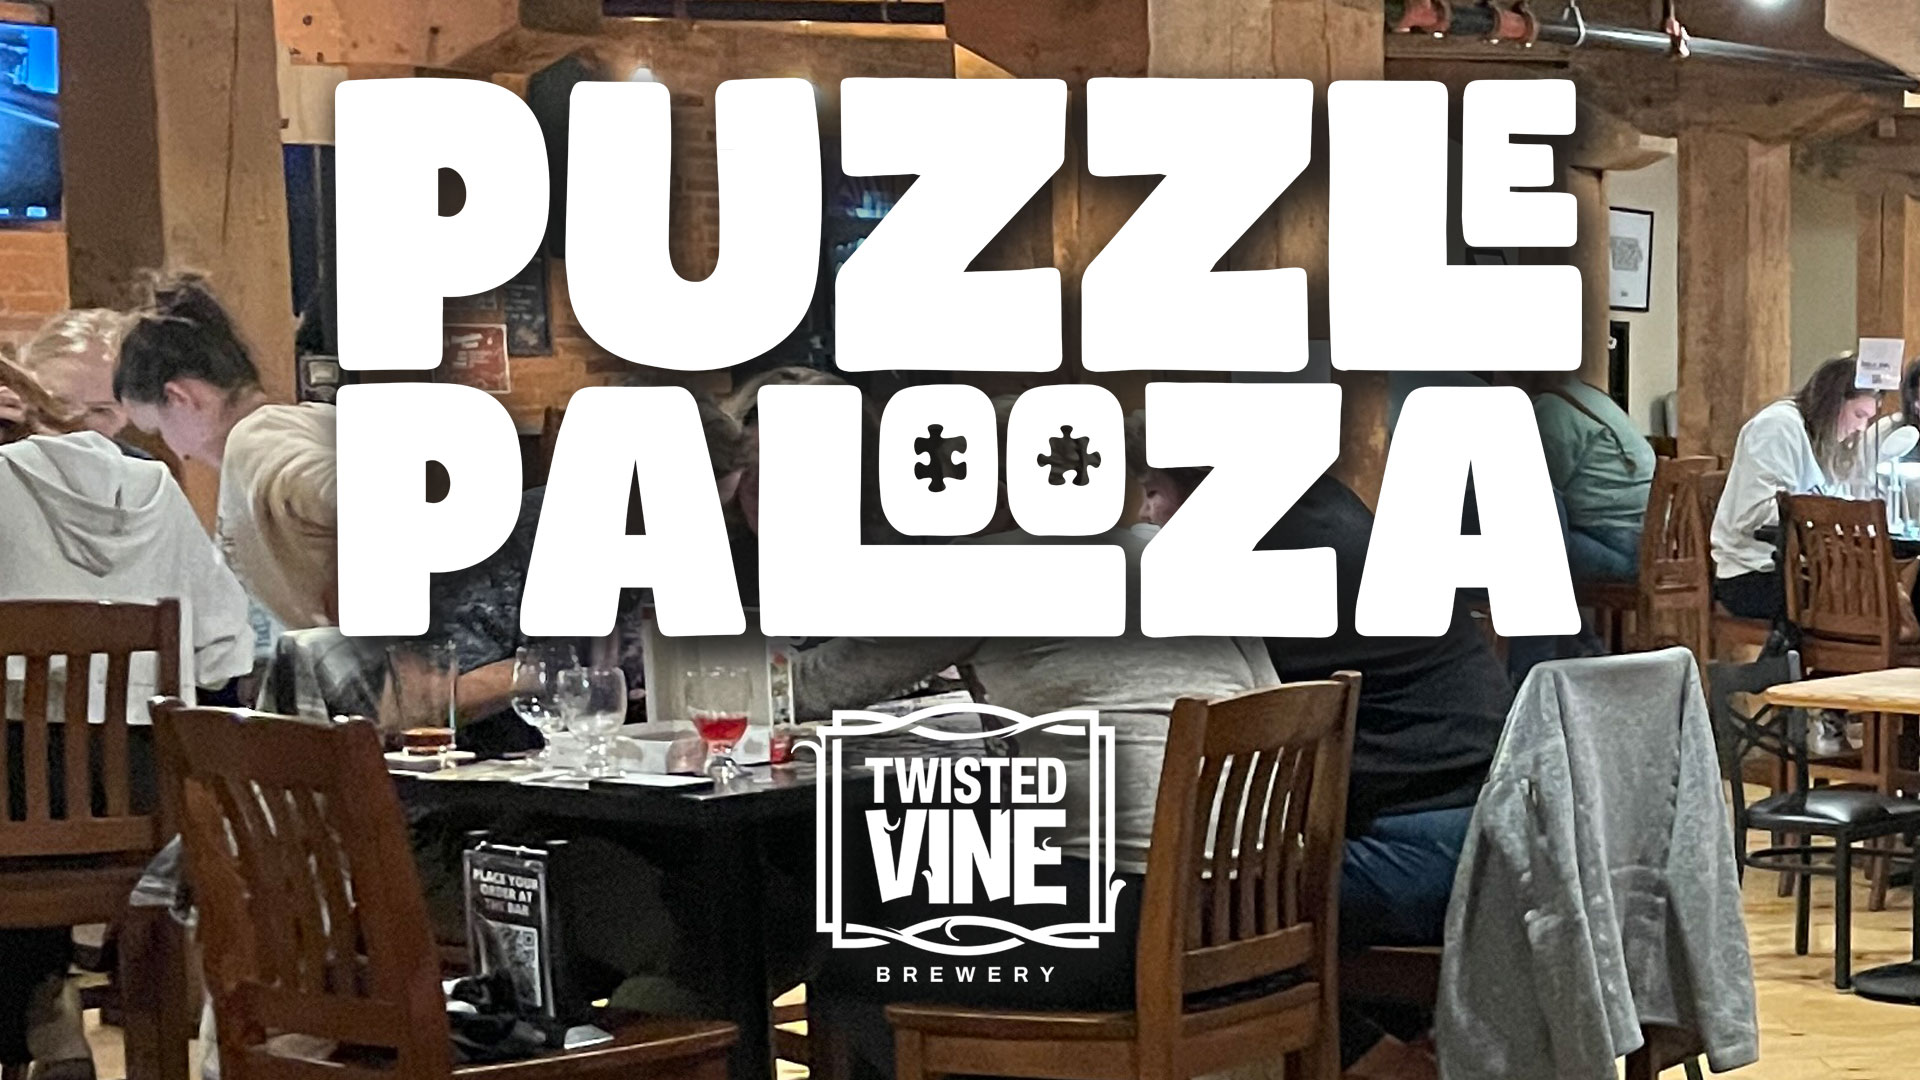 The Rook Room's Puzzlepalooza Jigsaw Puzzle Competition at Twisted Vine Brewery Des Moines, Iowa Event Image